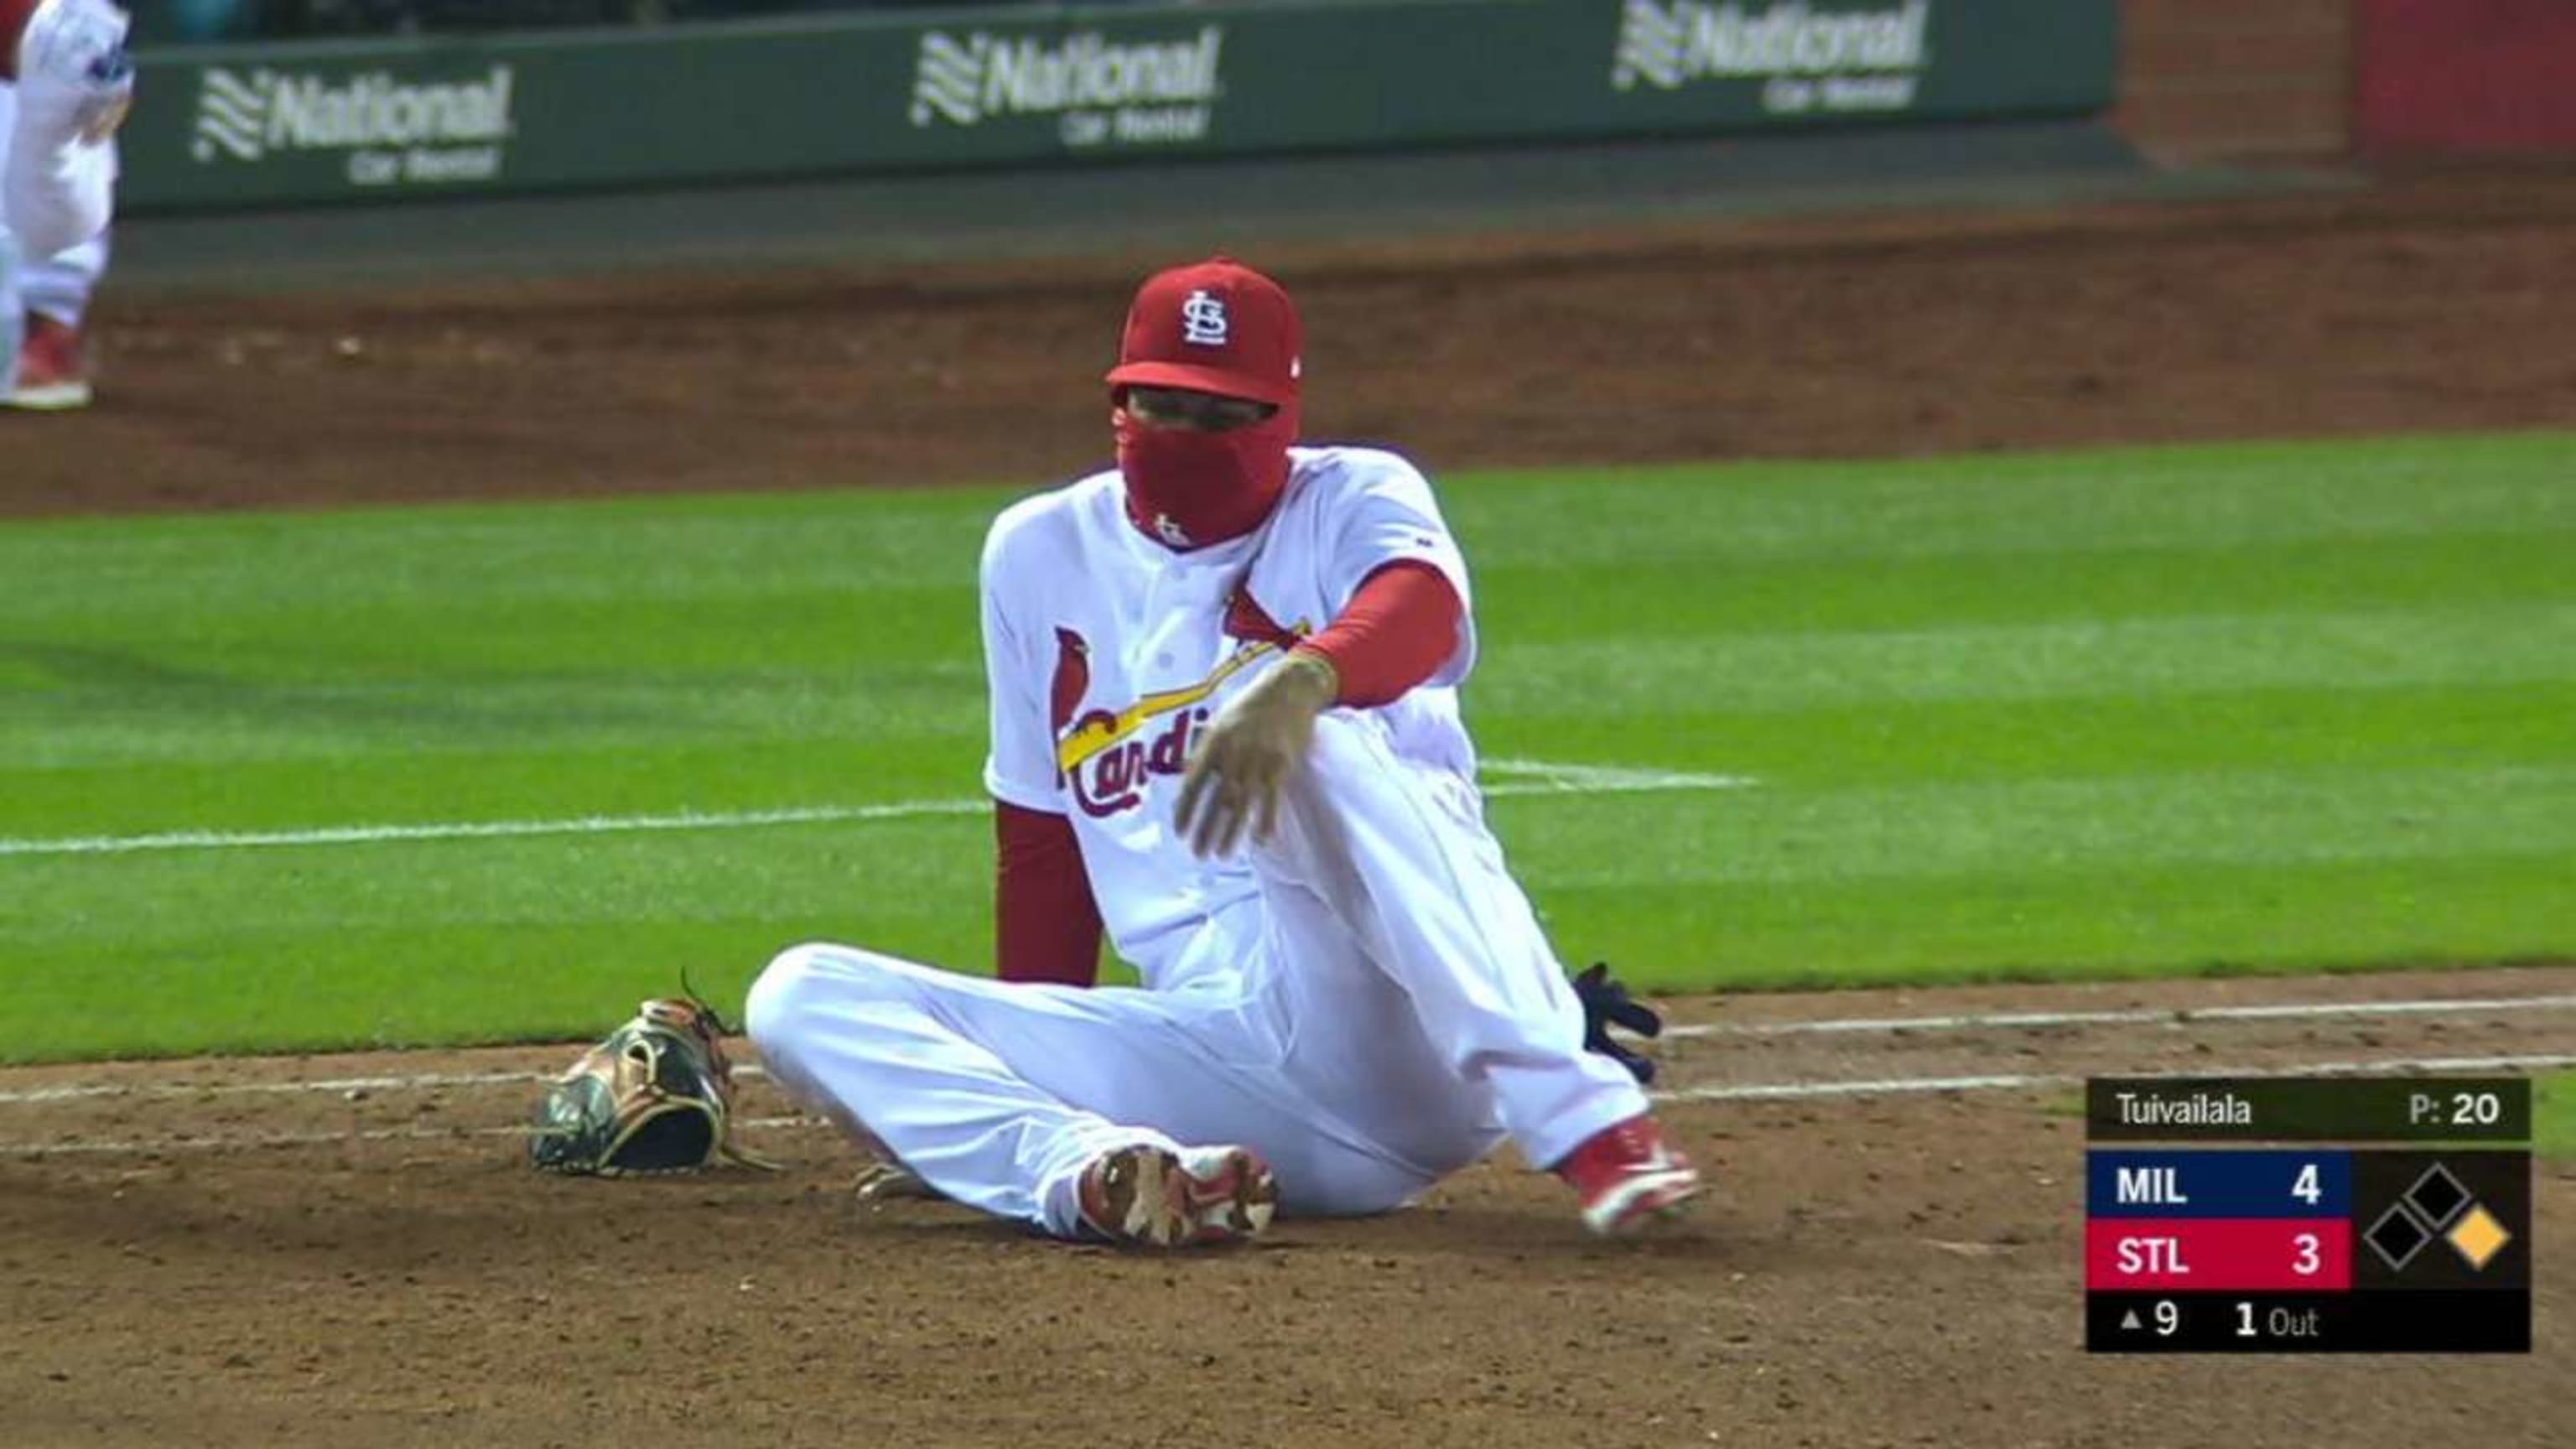 Yadier Molina injured in violent home plate collision, benches